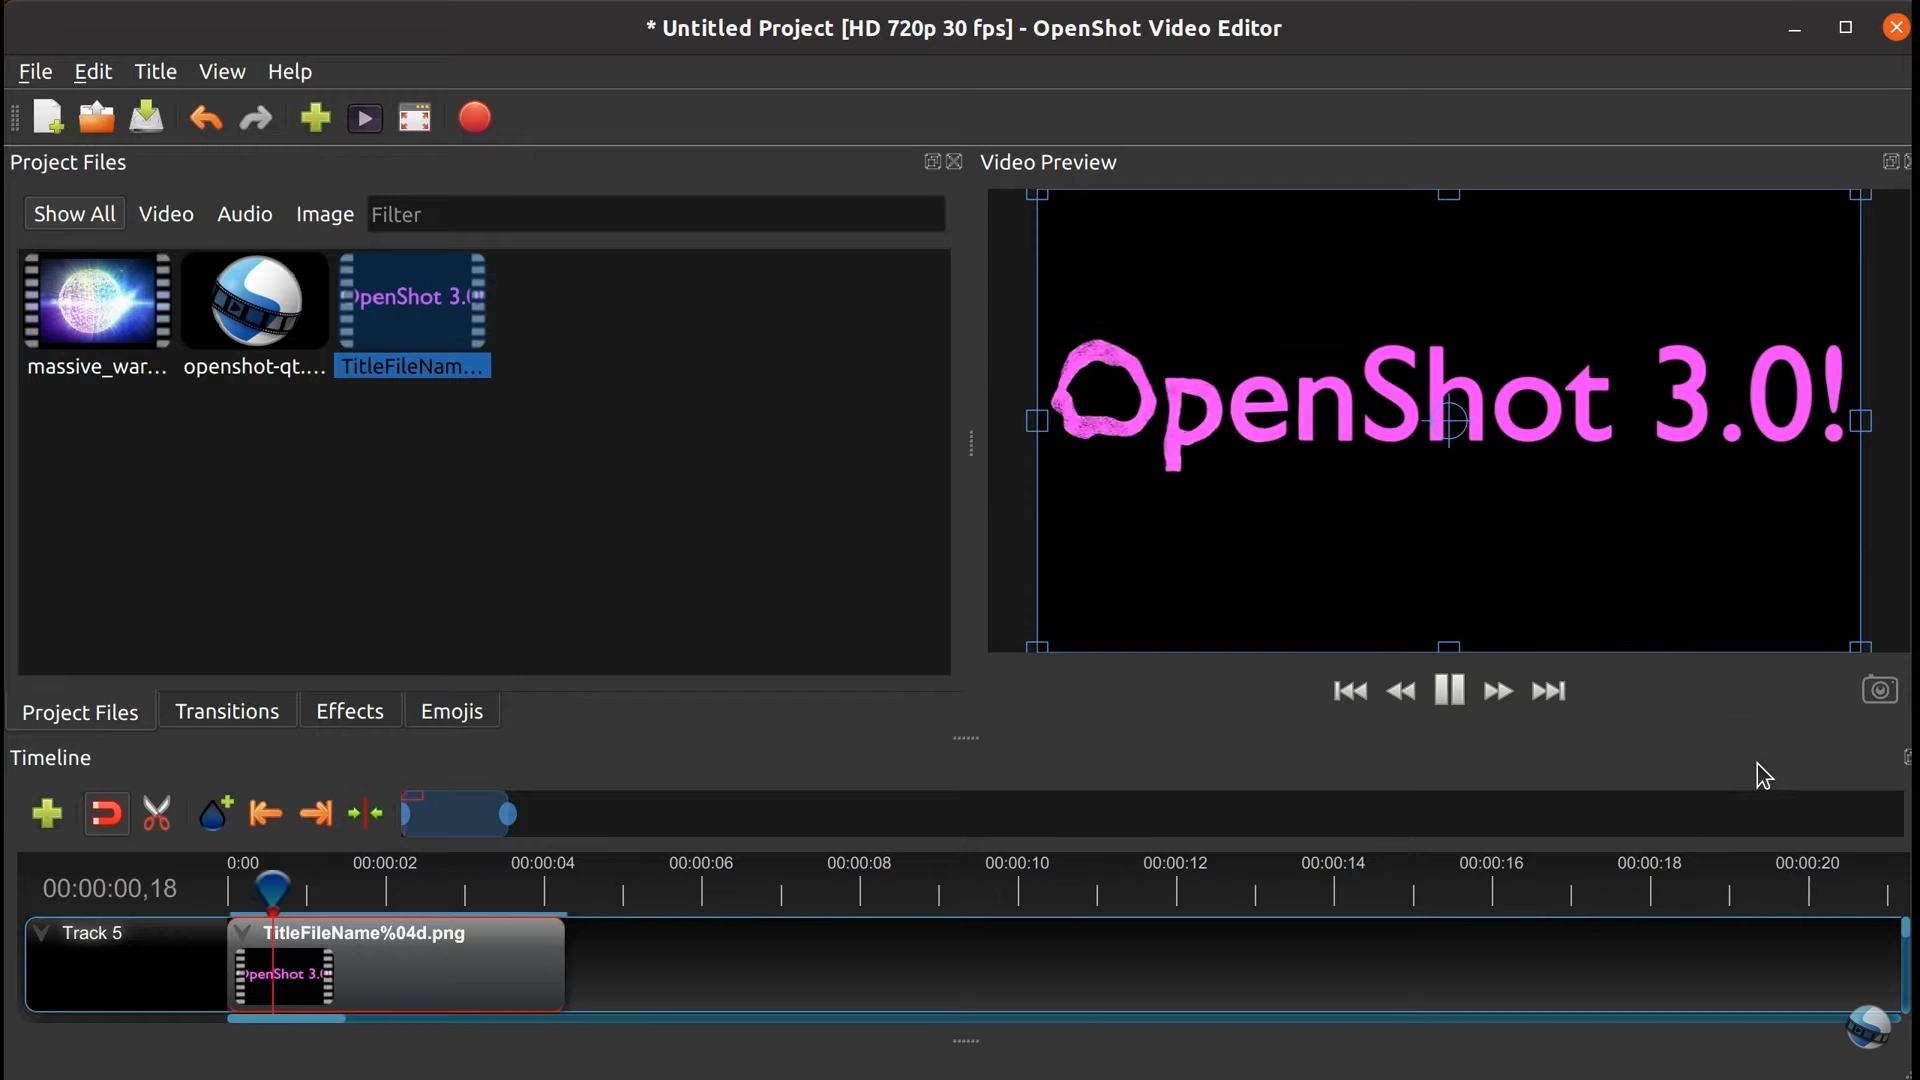 OpenShot 3.0 Open-Source Video Editor Released with More Than 1000 Improvements